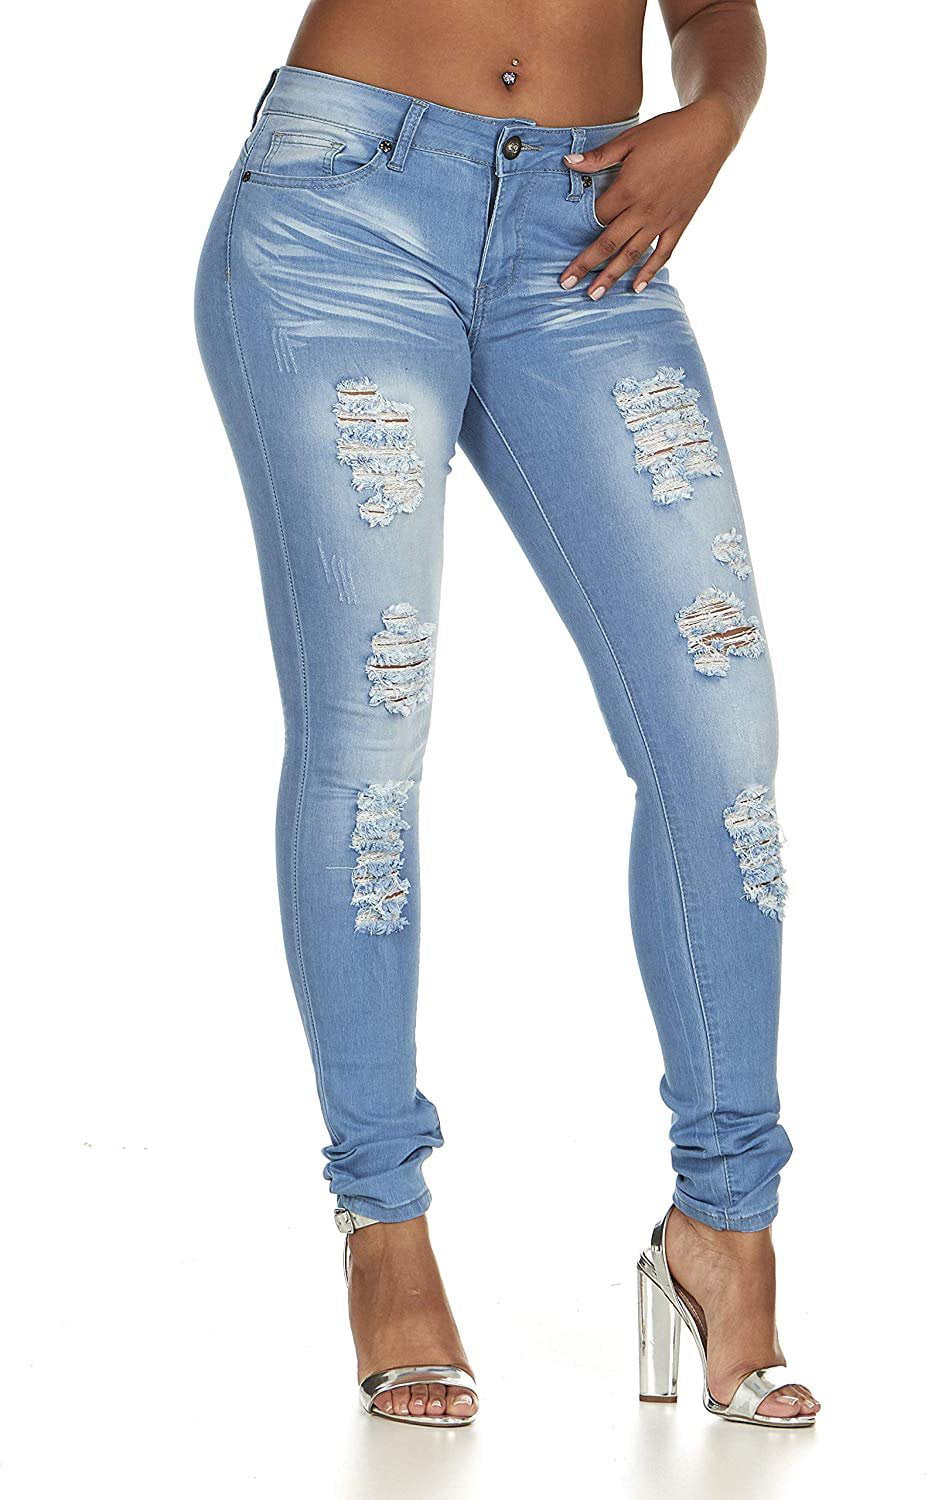 VIP Jeans - Cute Ripped Jeans for Women Distressed Washed Skinny Long